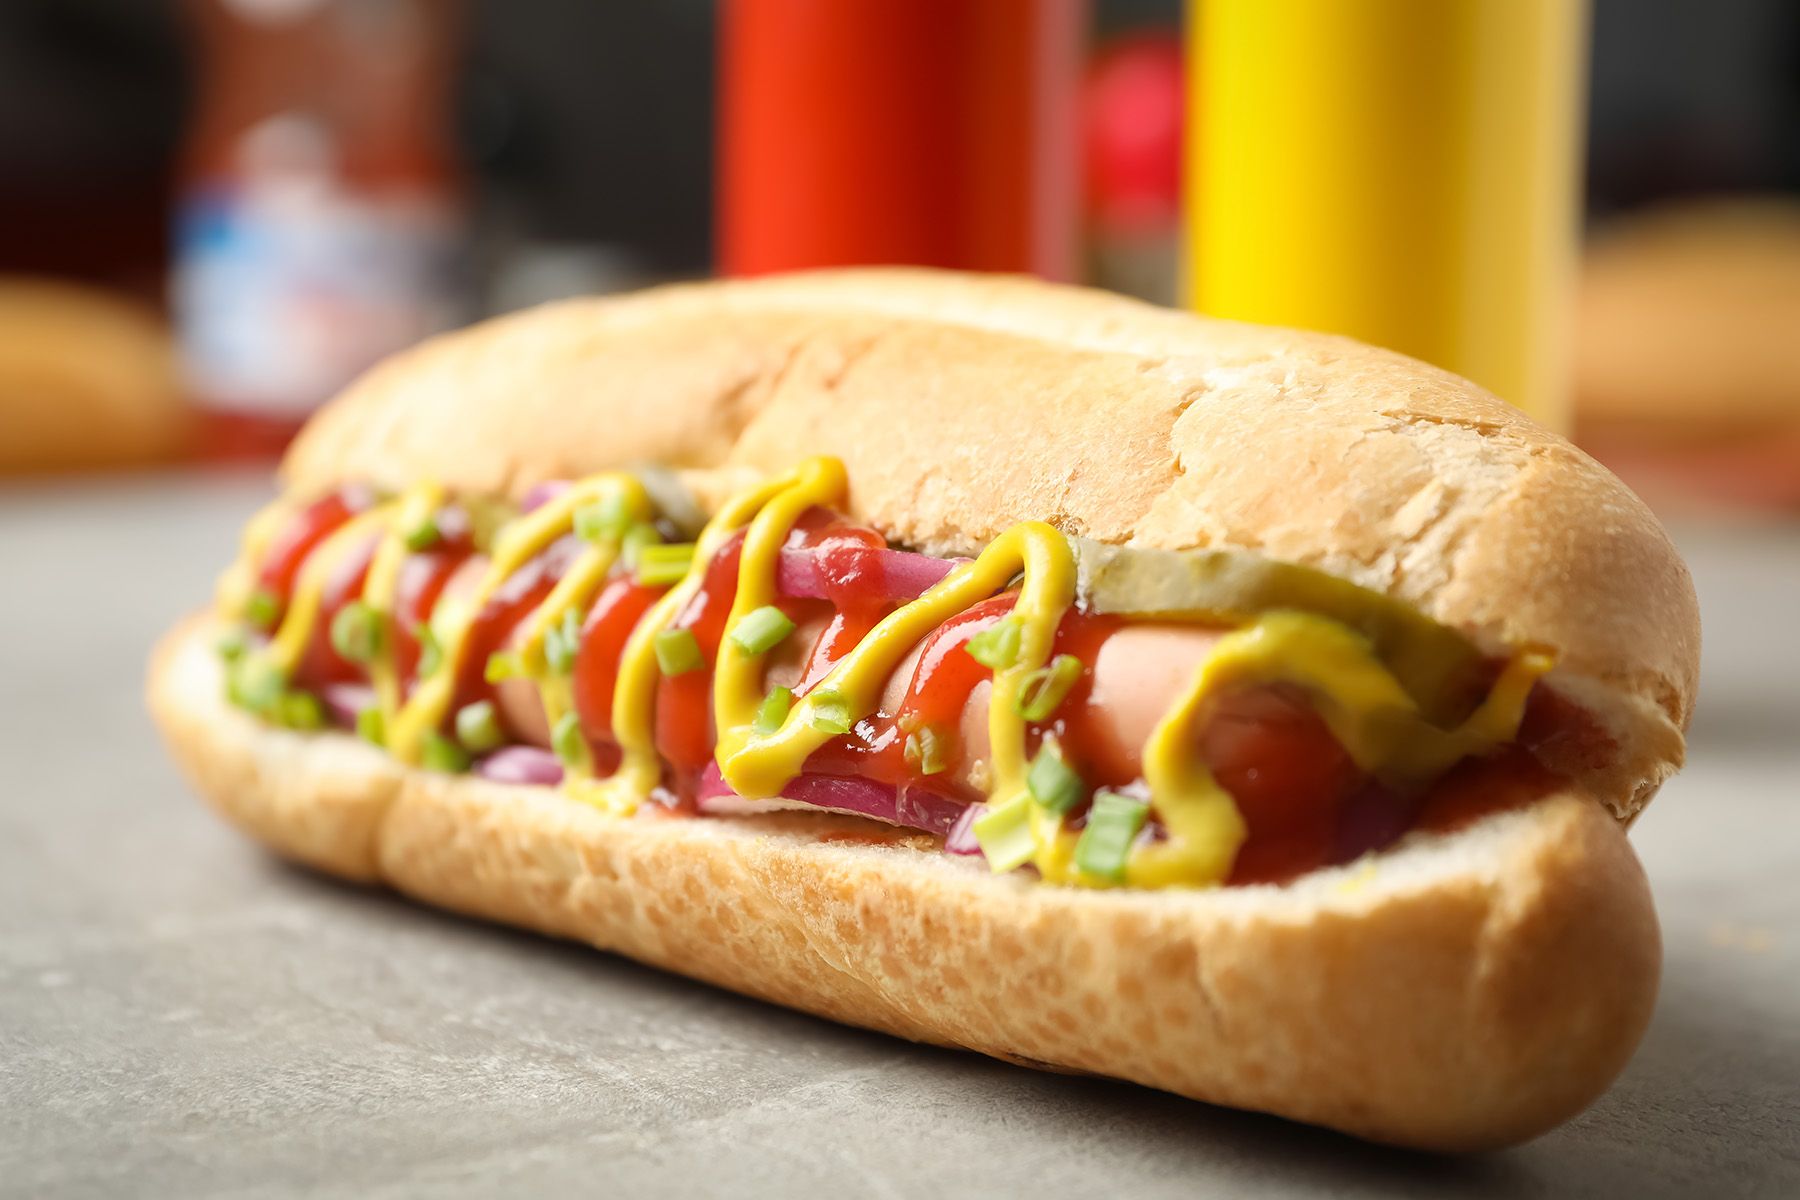 A hot dog sandwich served on a split roll with mustard, onions and ketchup